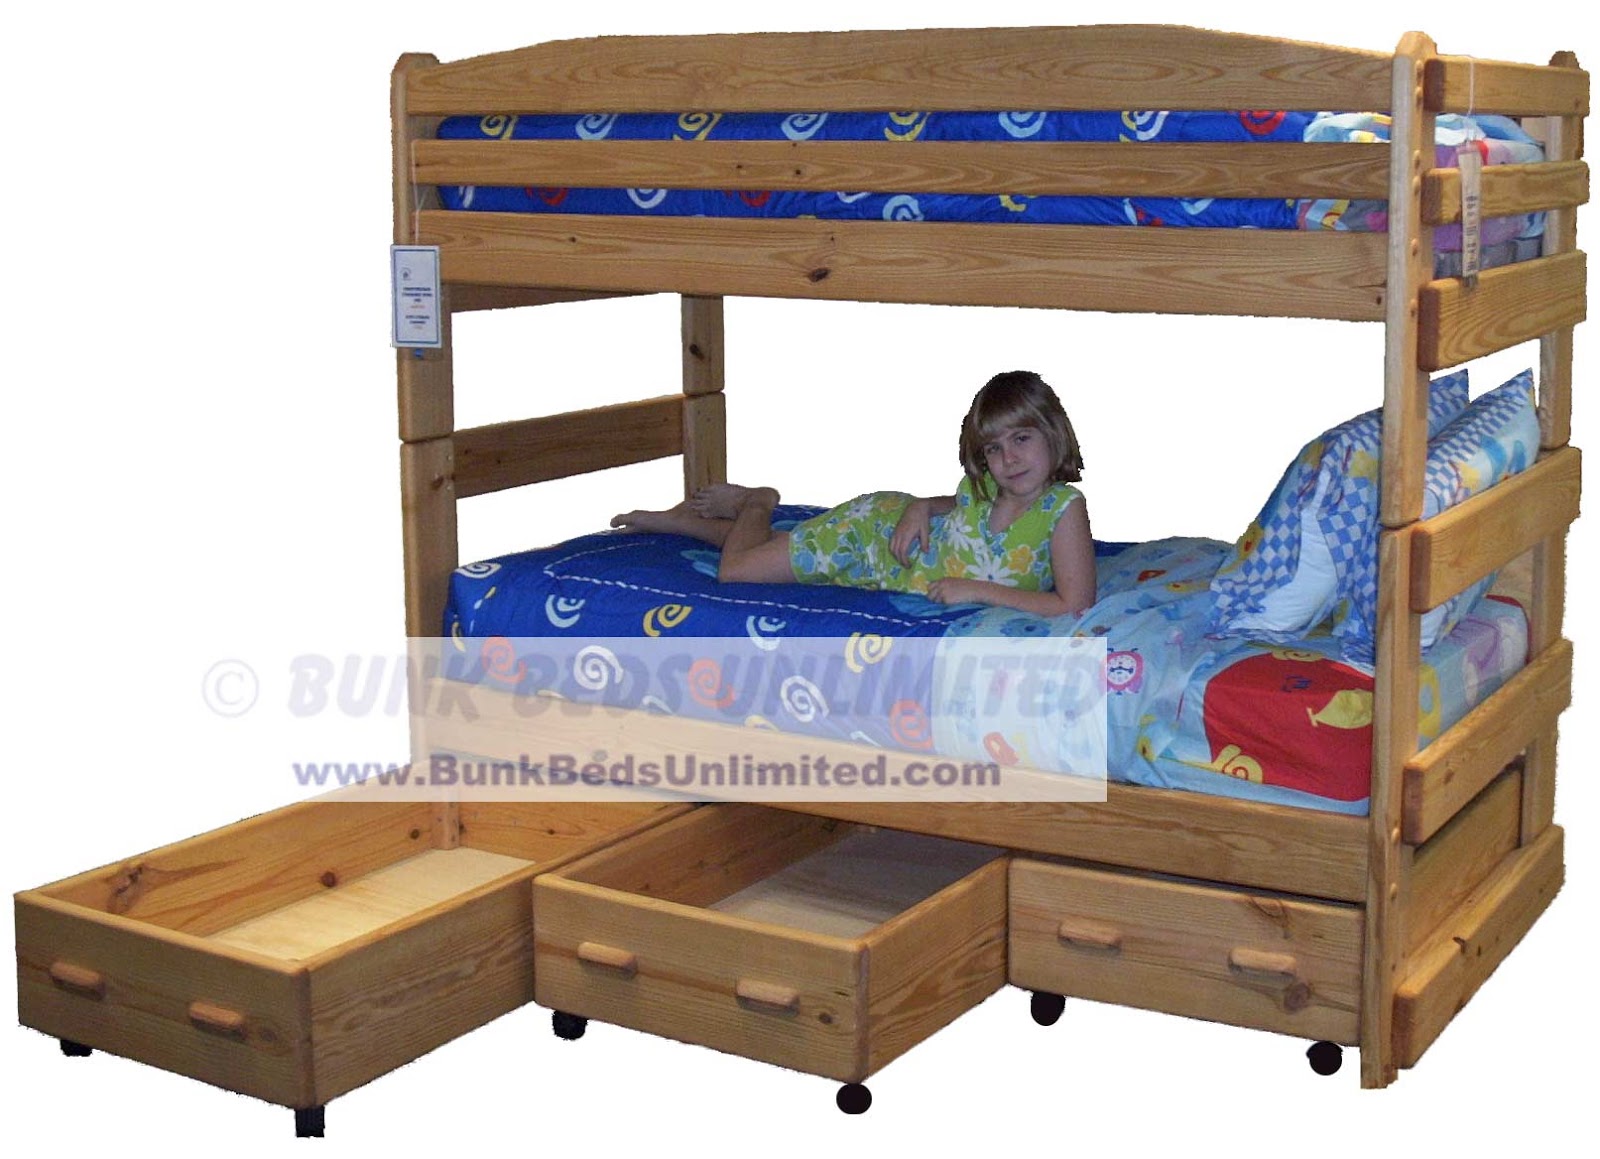  bunk bed stackable twin over full bunk bed l shape bunk bed and triple